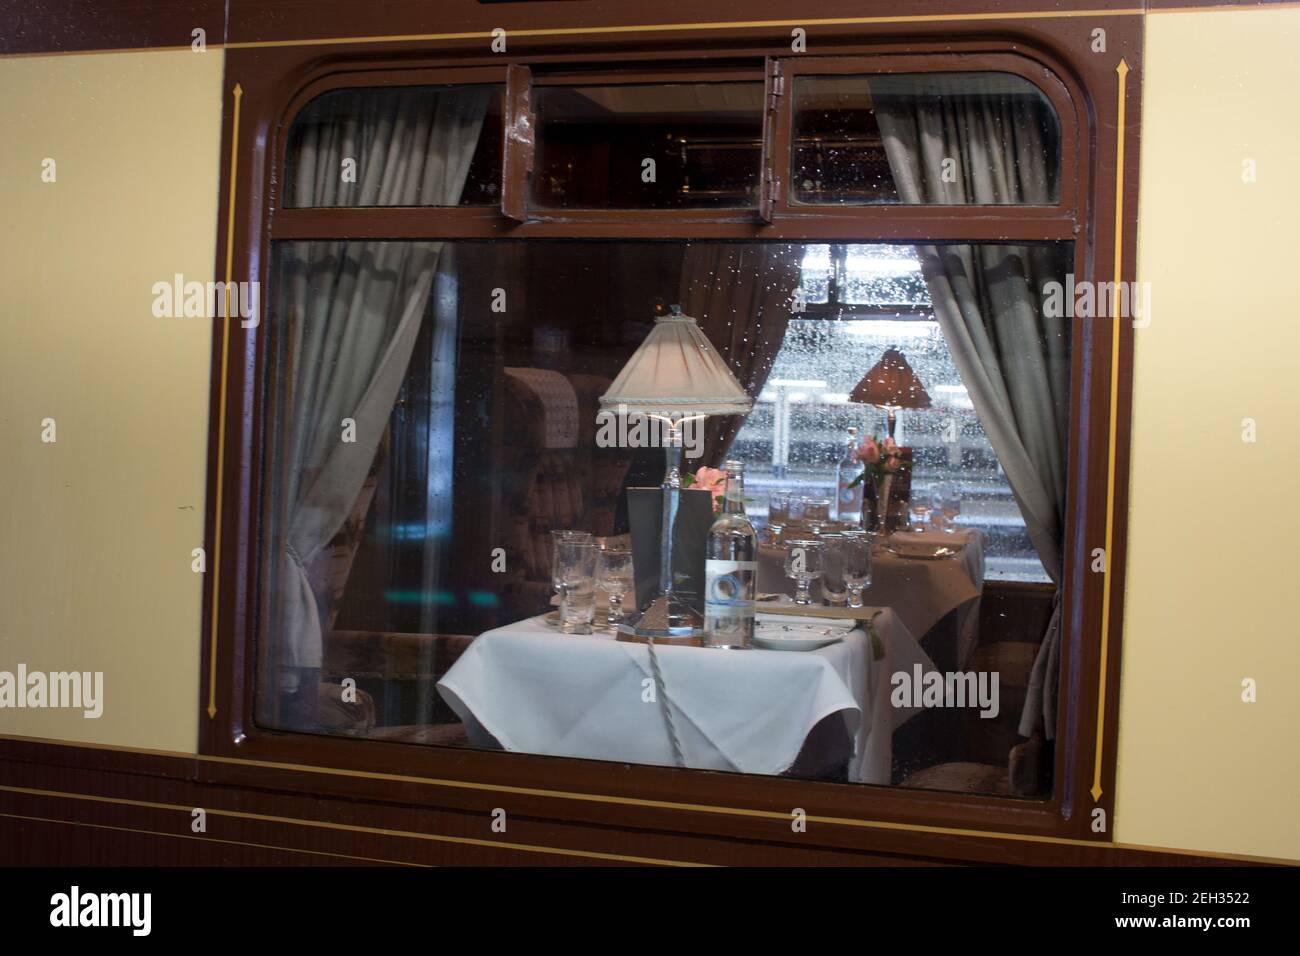 close-up of the window of Pullman railway car Audrey Stock Photo